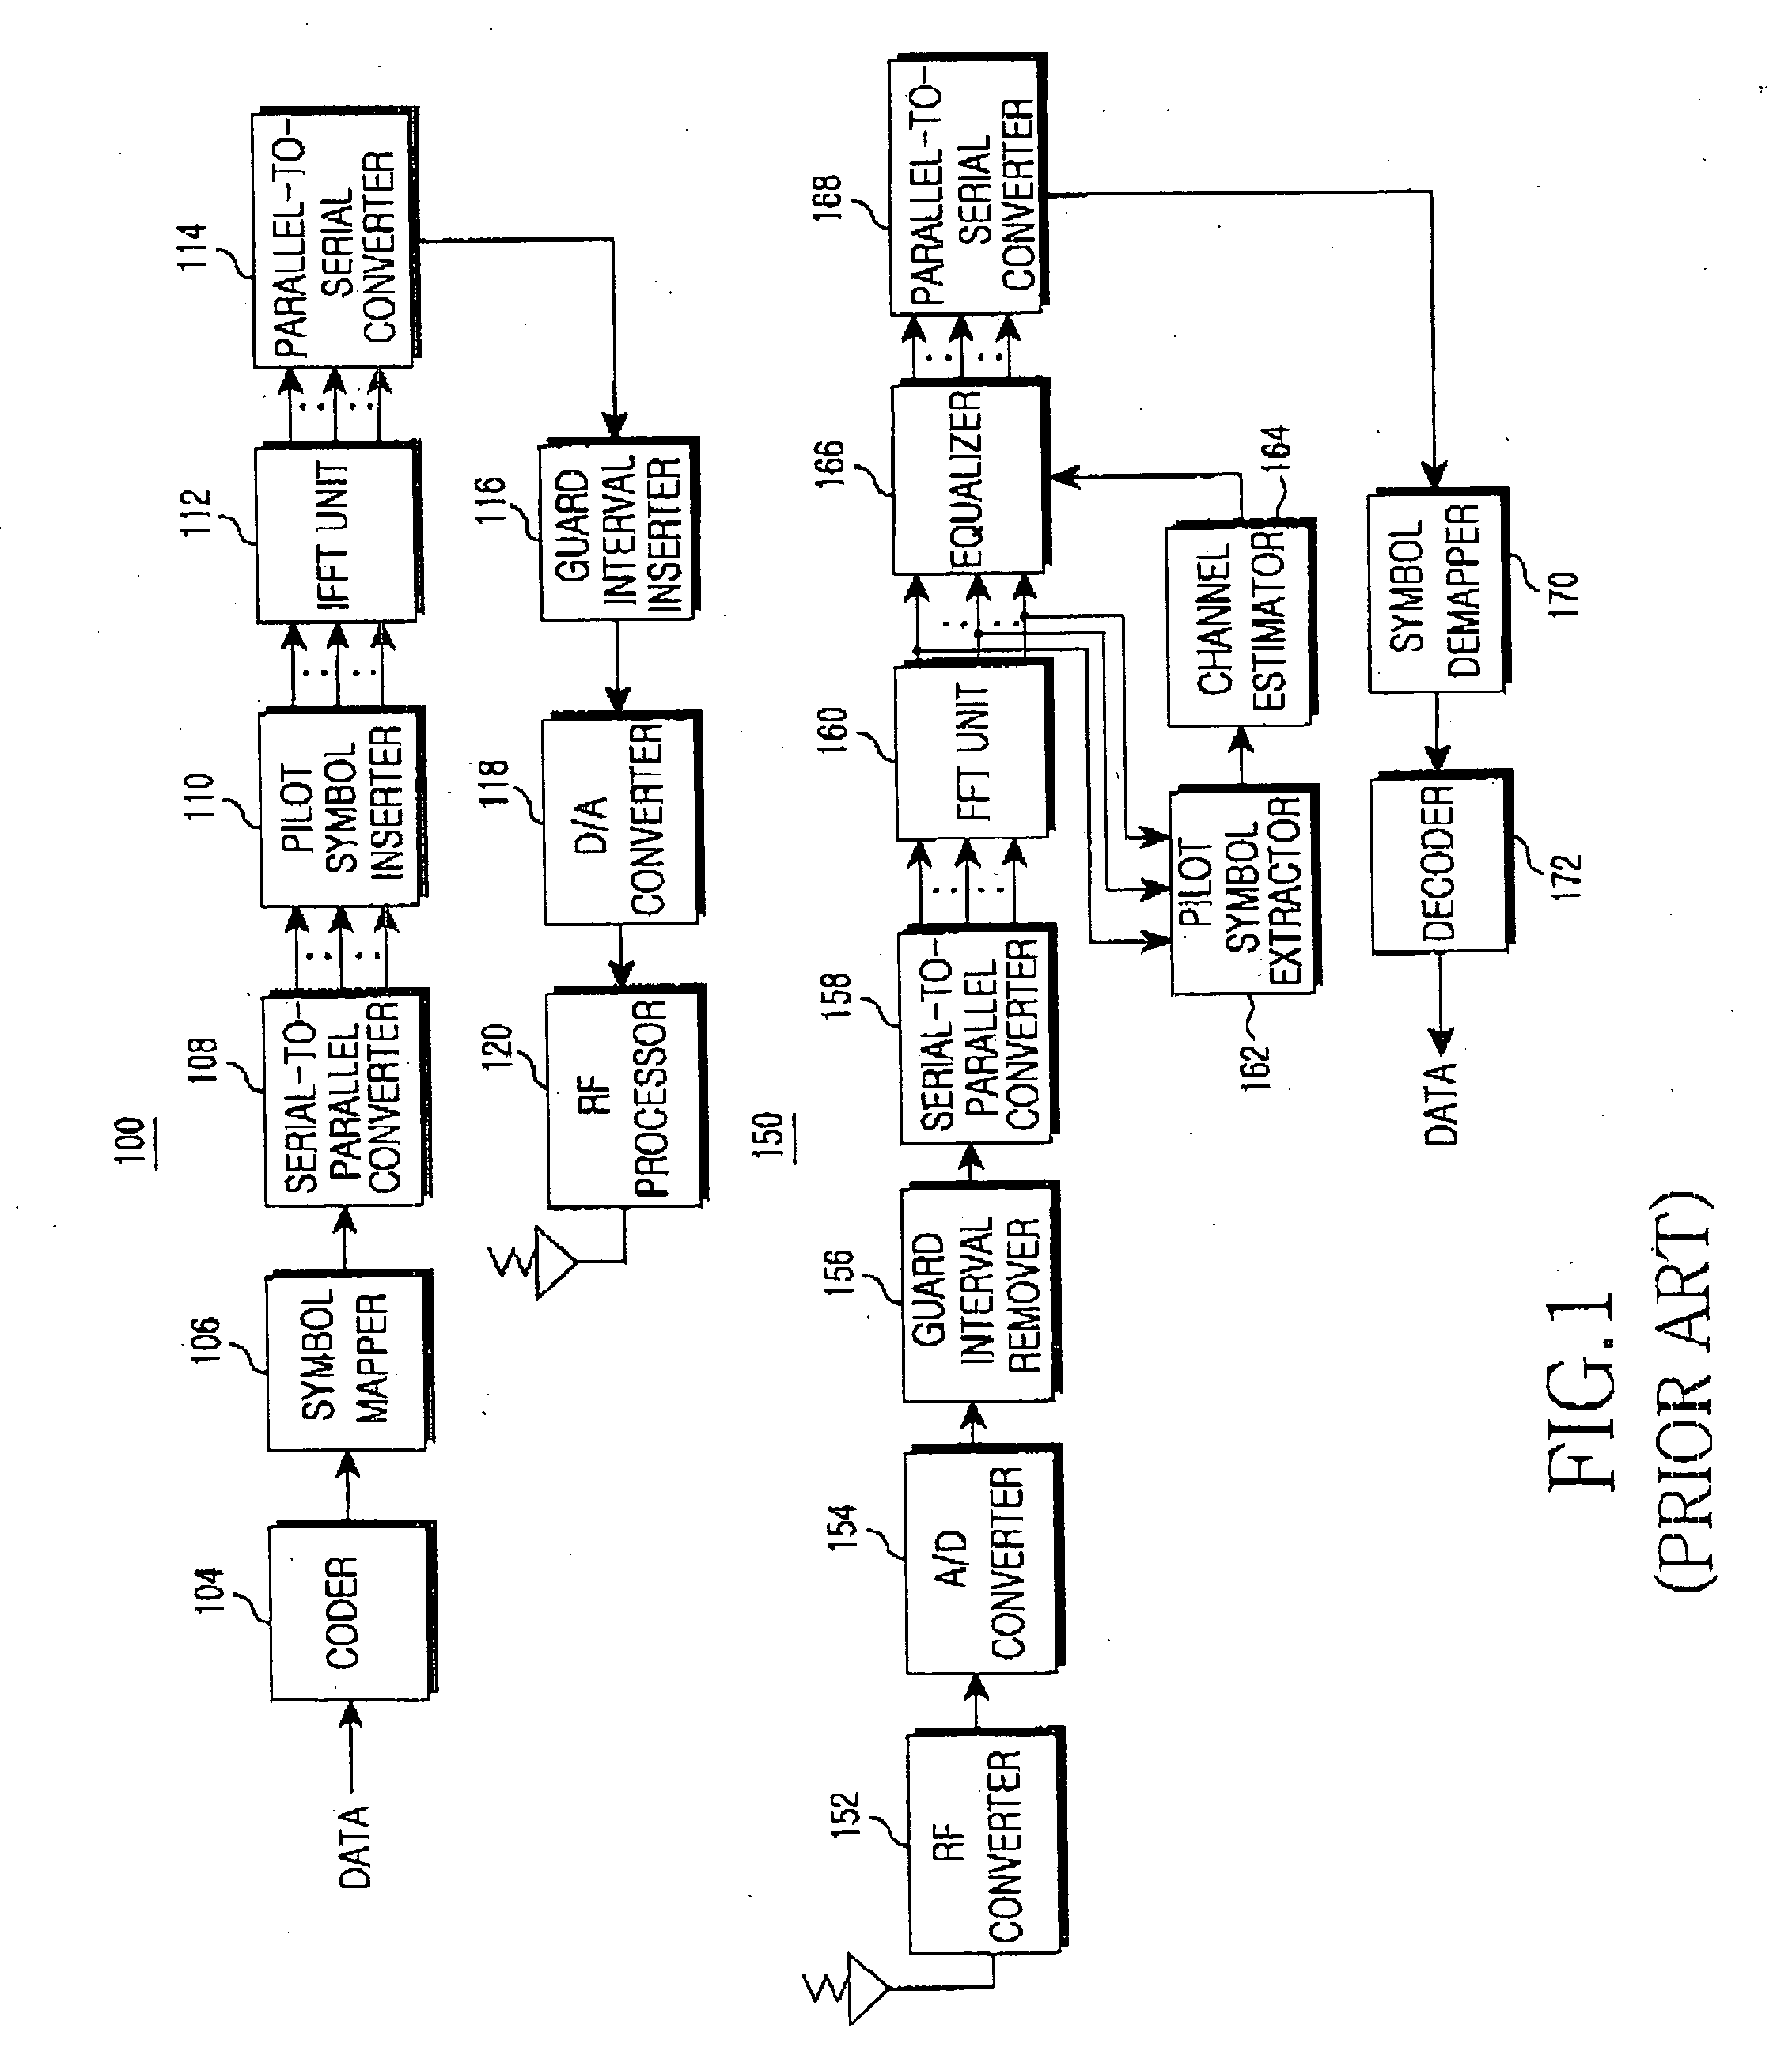 Apparatus and method for feedback of channel quality information in communication systems using an OFDM scheme